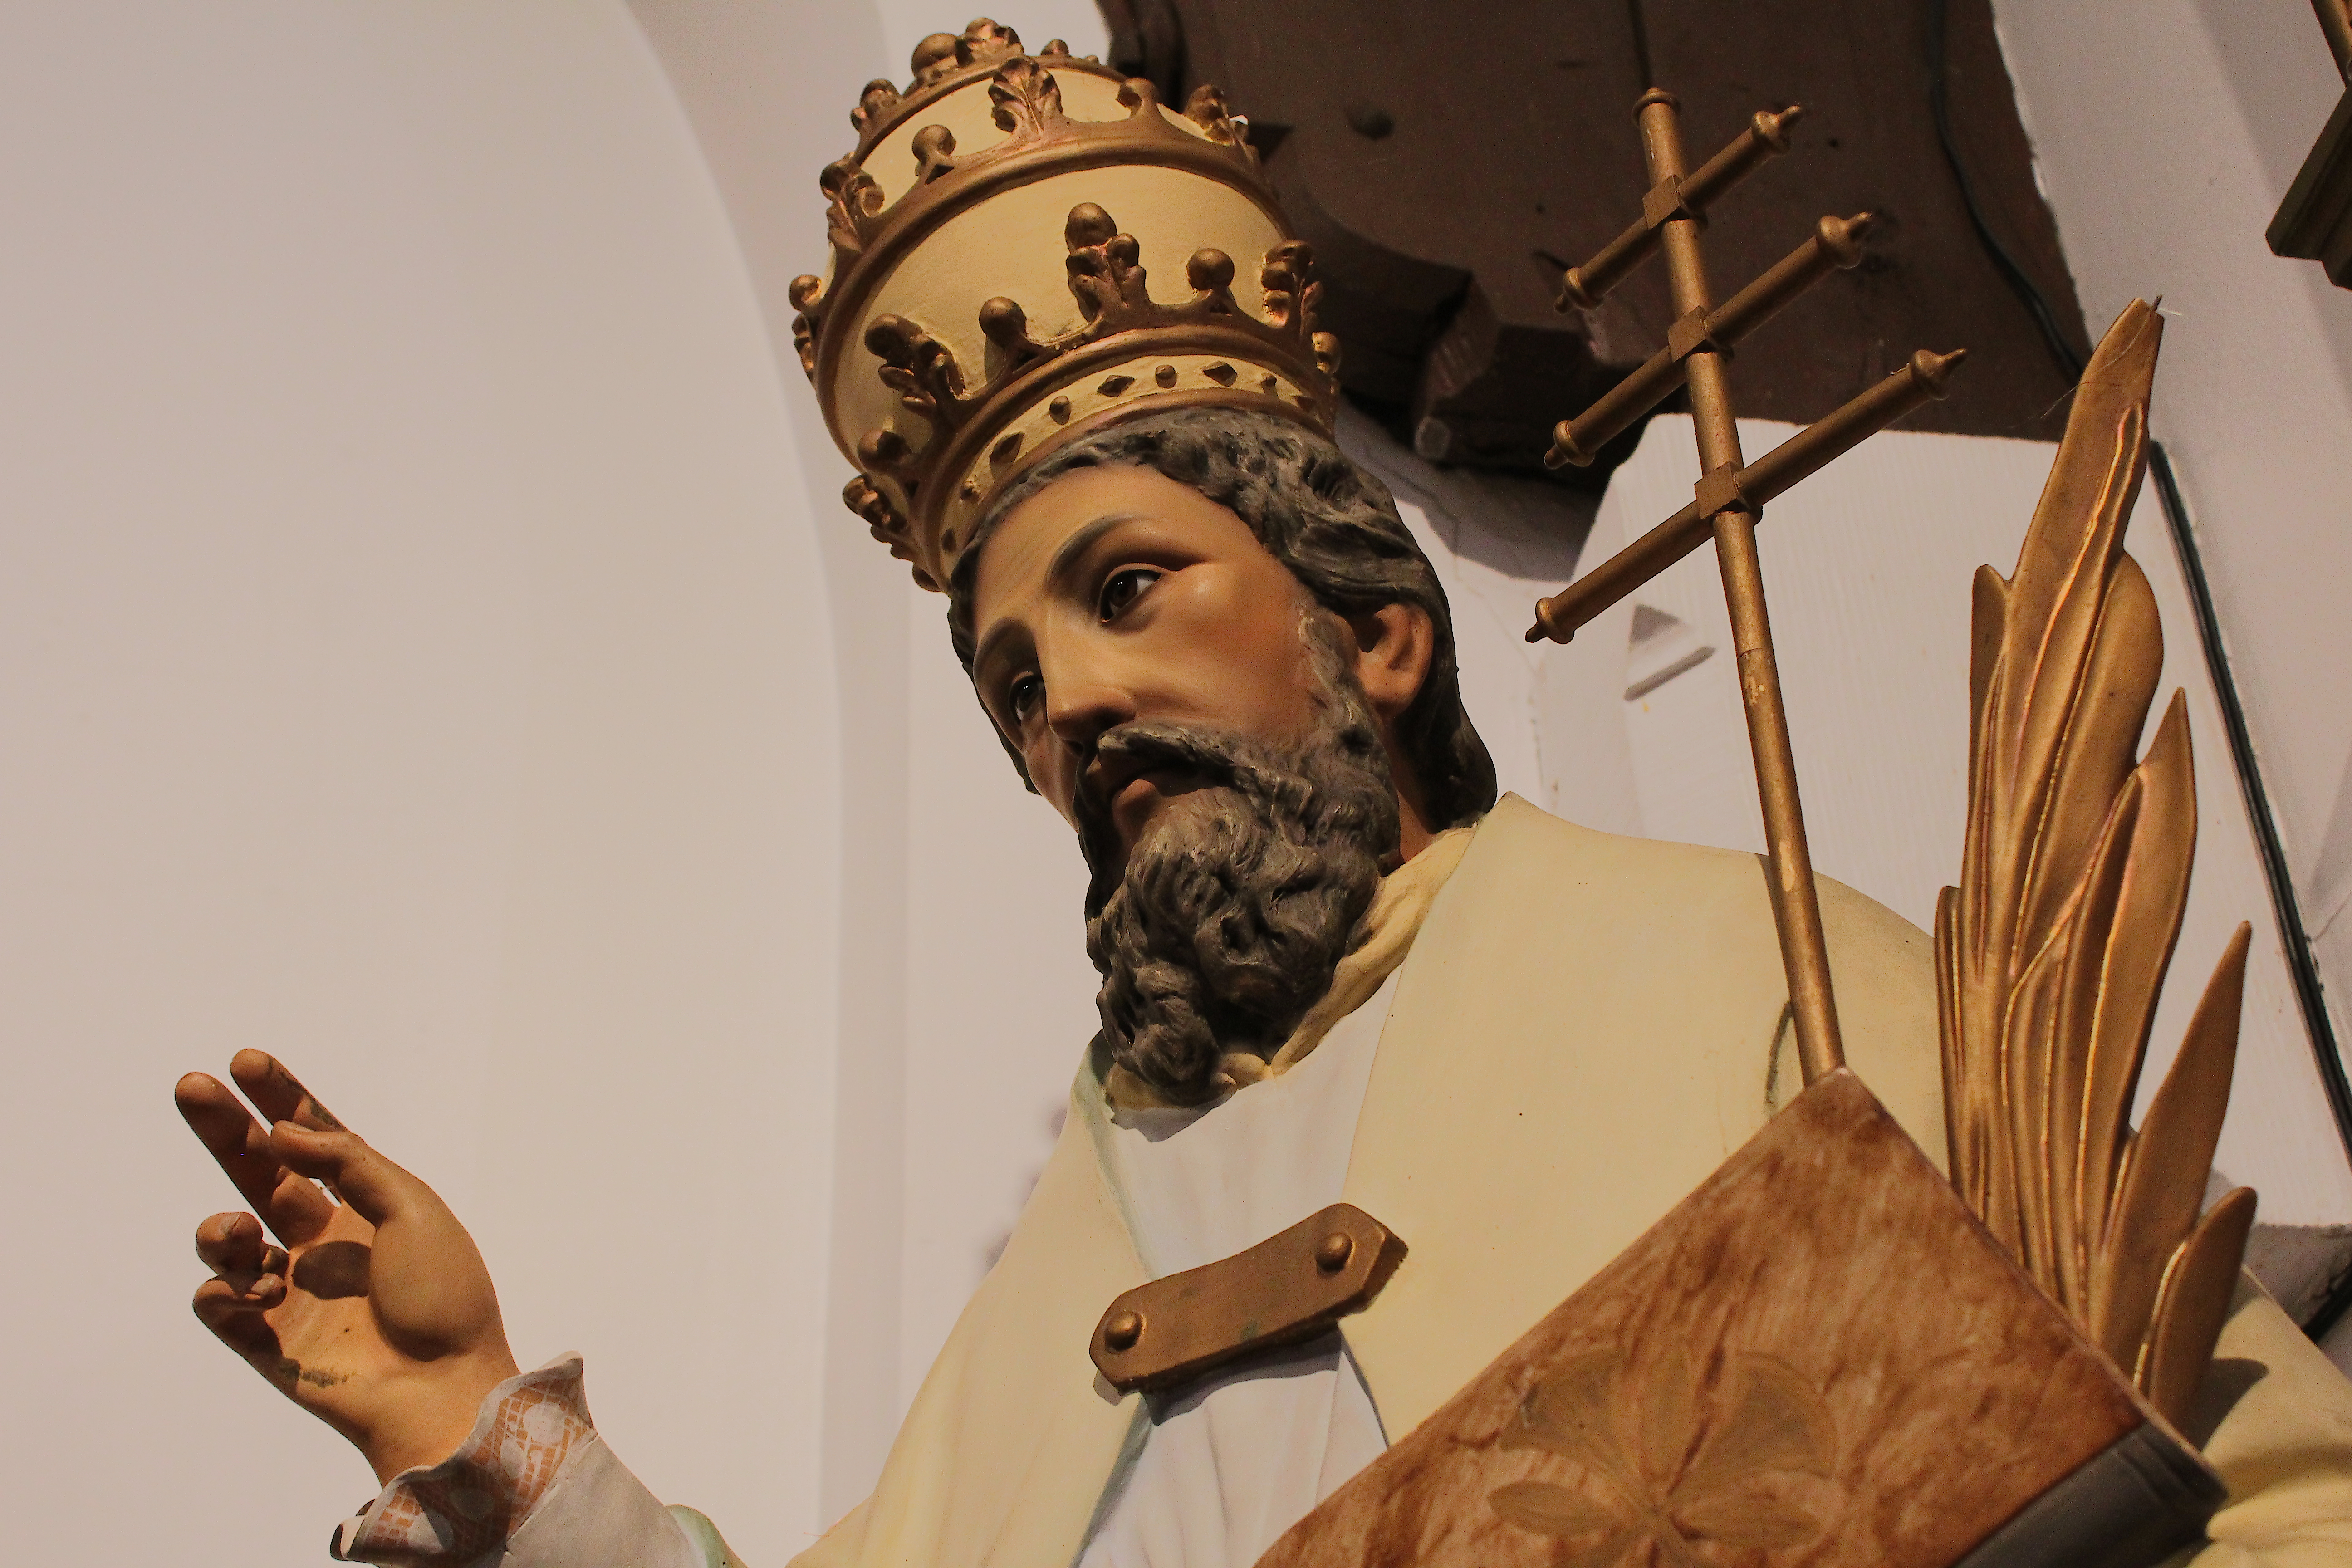 A close up of a statue of St. Cornelius from the shoulders up